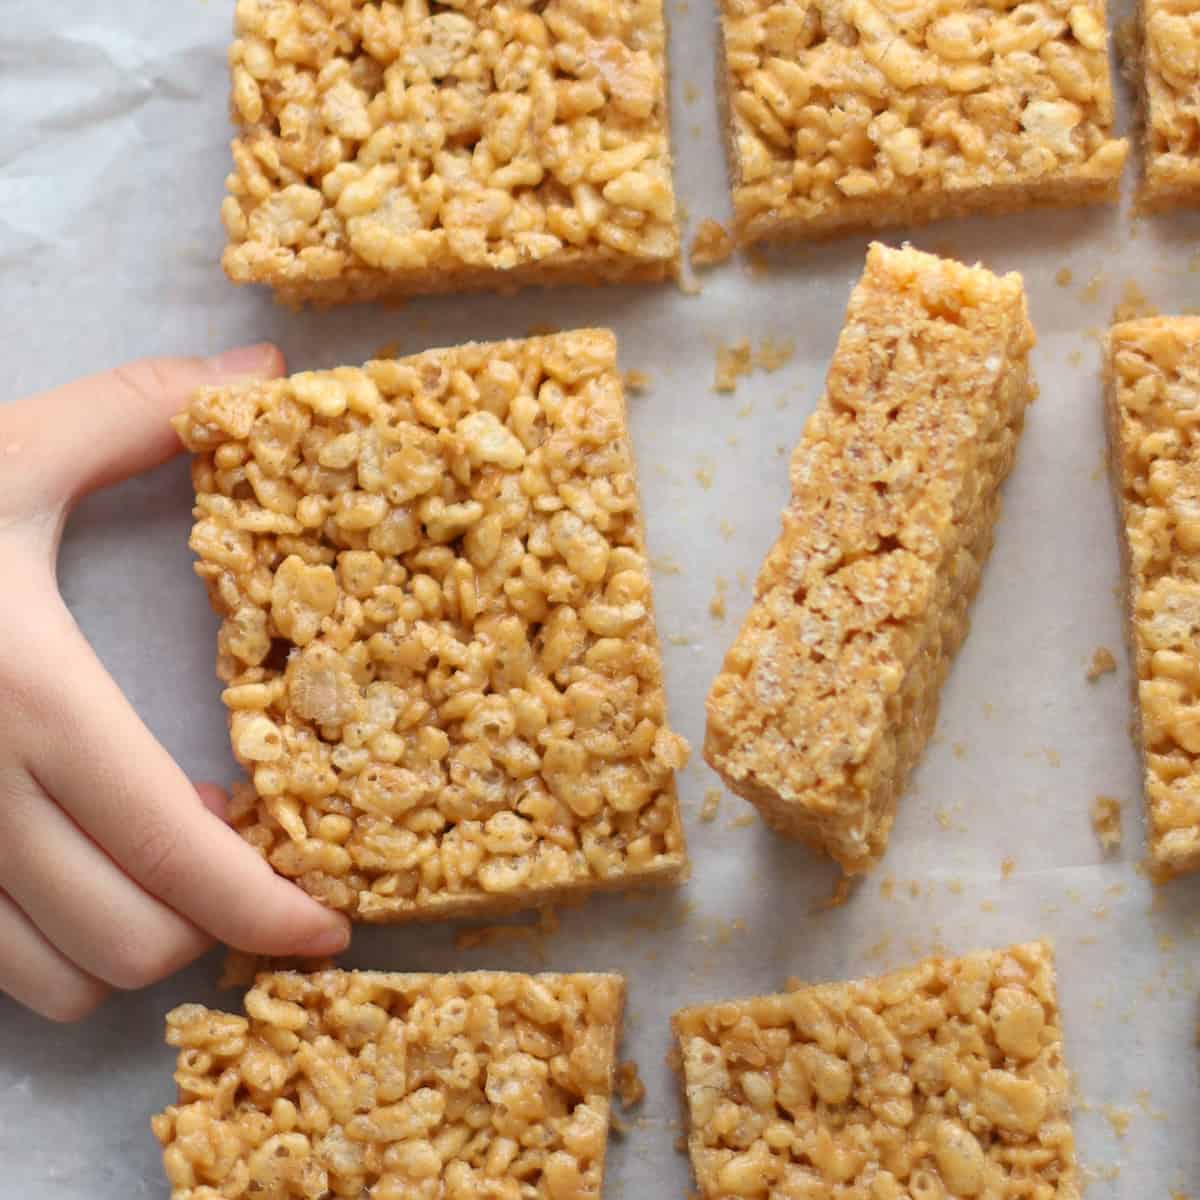 Healthy Rice Krispie Treats (with Peanut Butter) - MJ and Hungryman